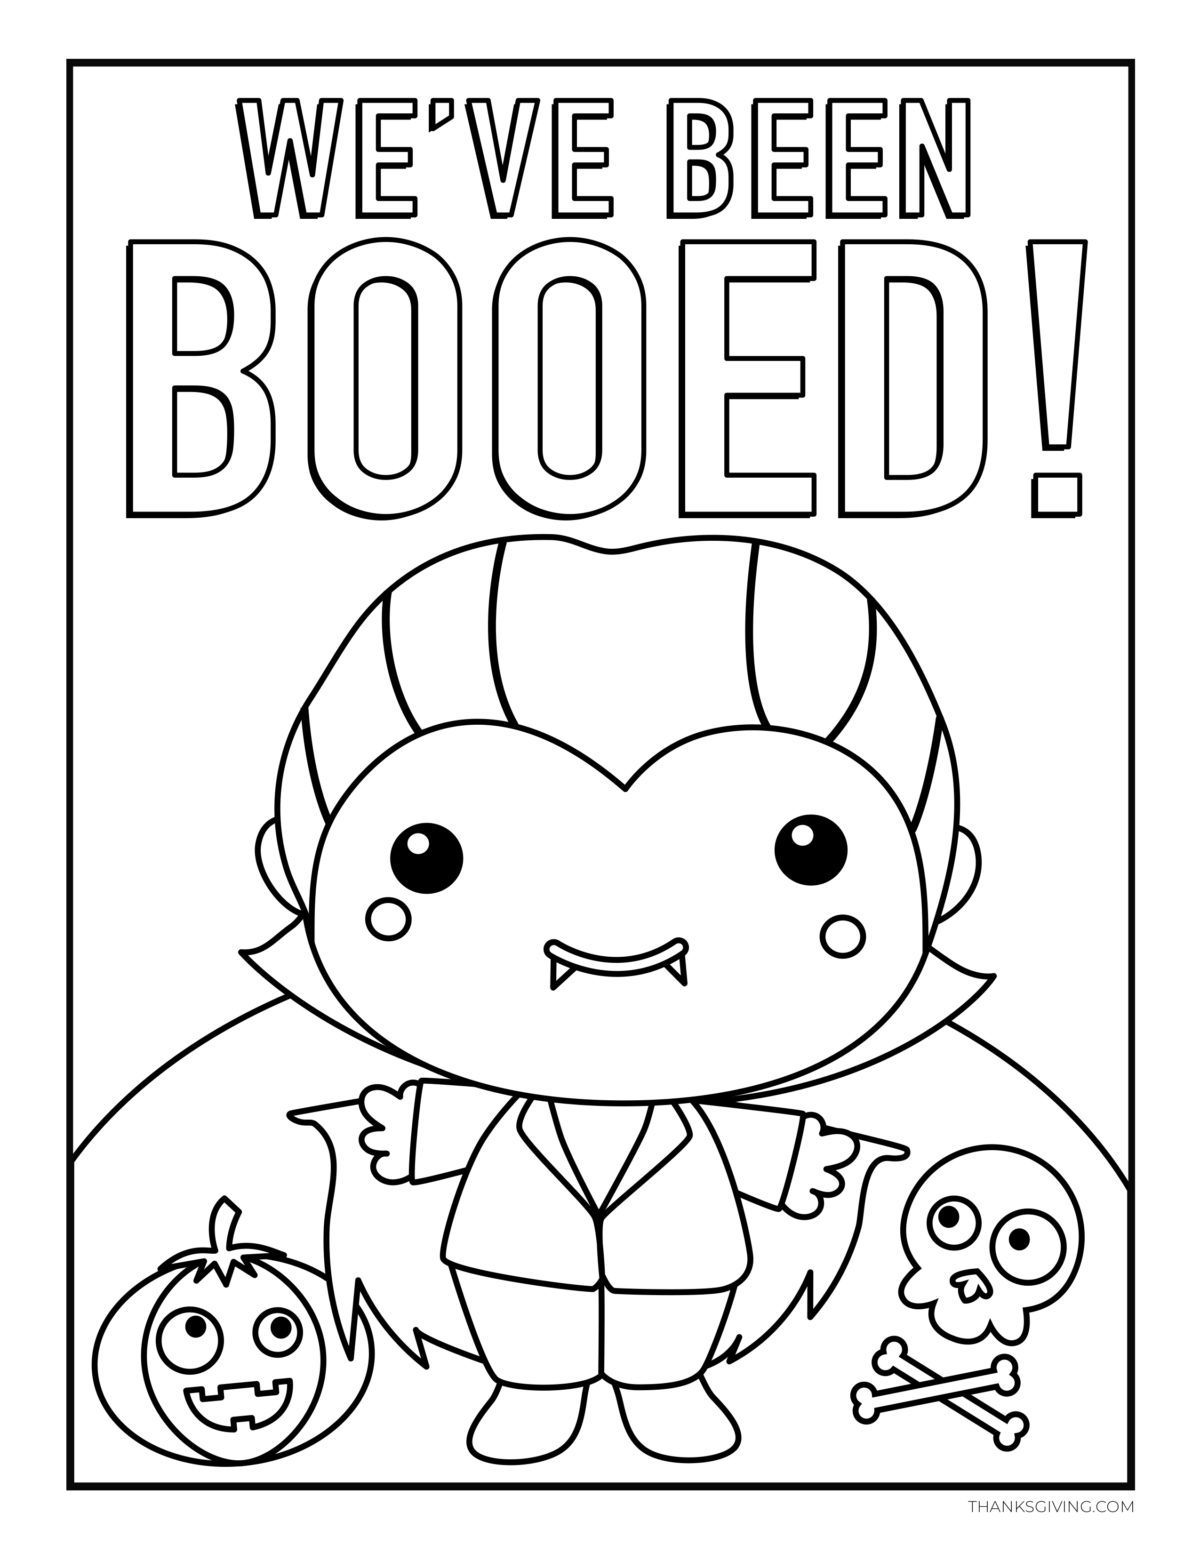 Download Cute Vampire Coloring Page - Free Printable Coloring Pages ...